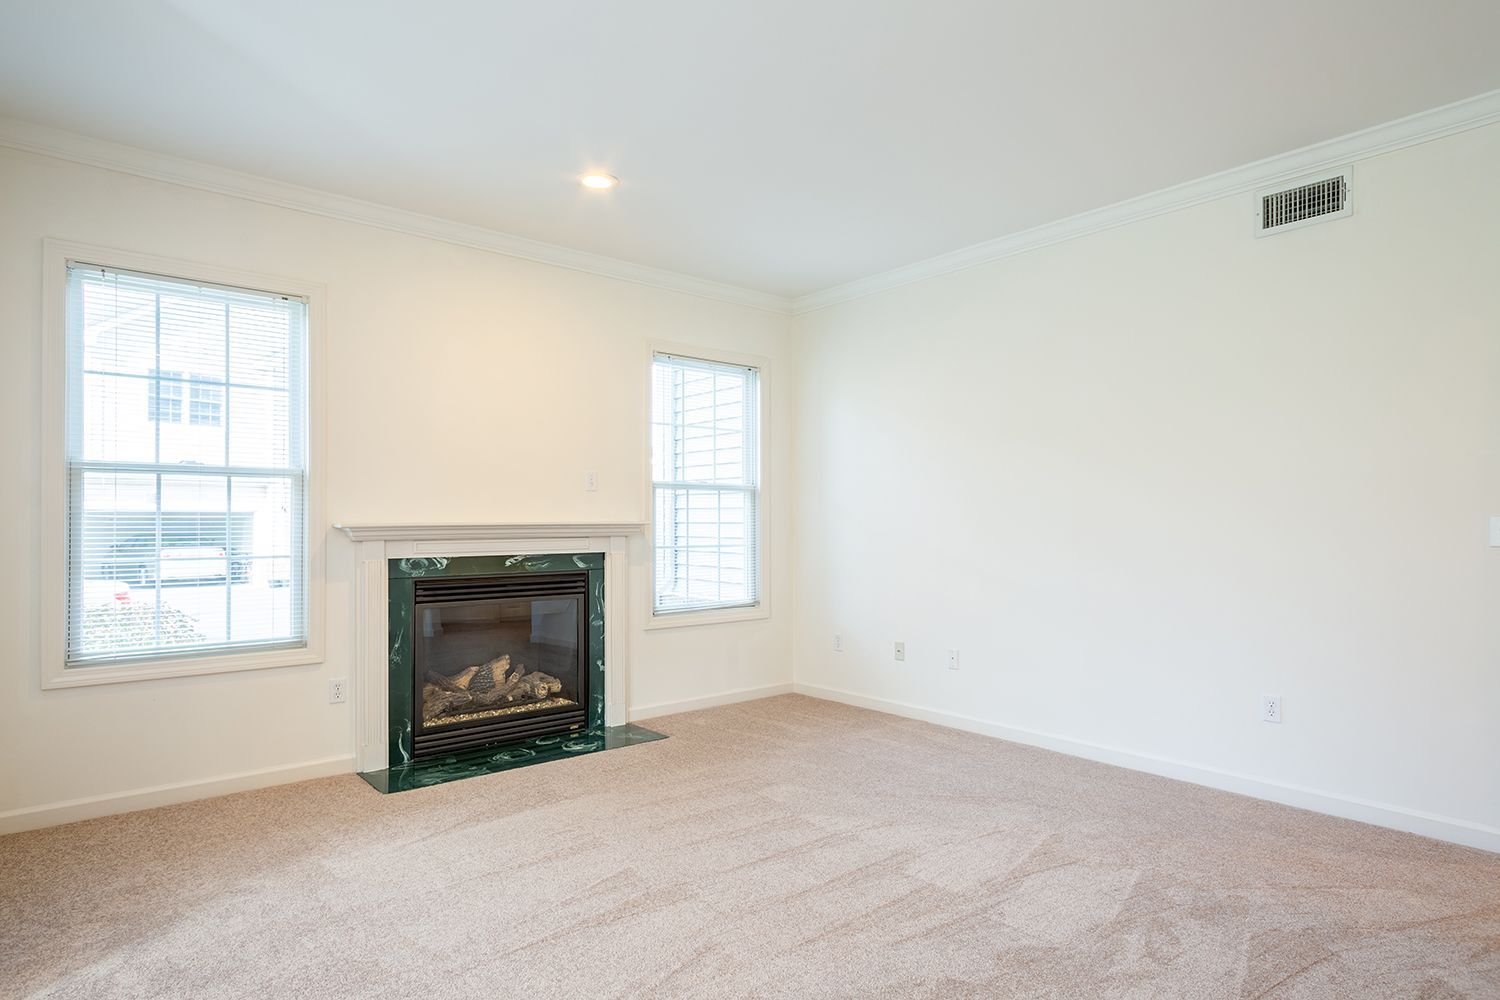 Living room photo showing fireplace with windows on either side